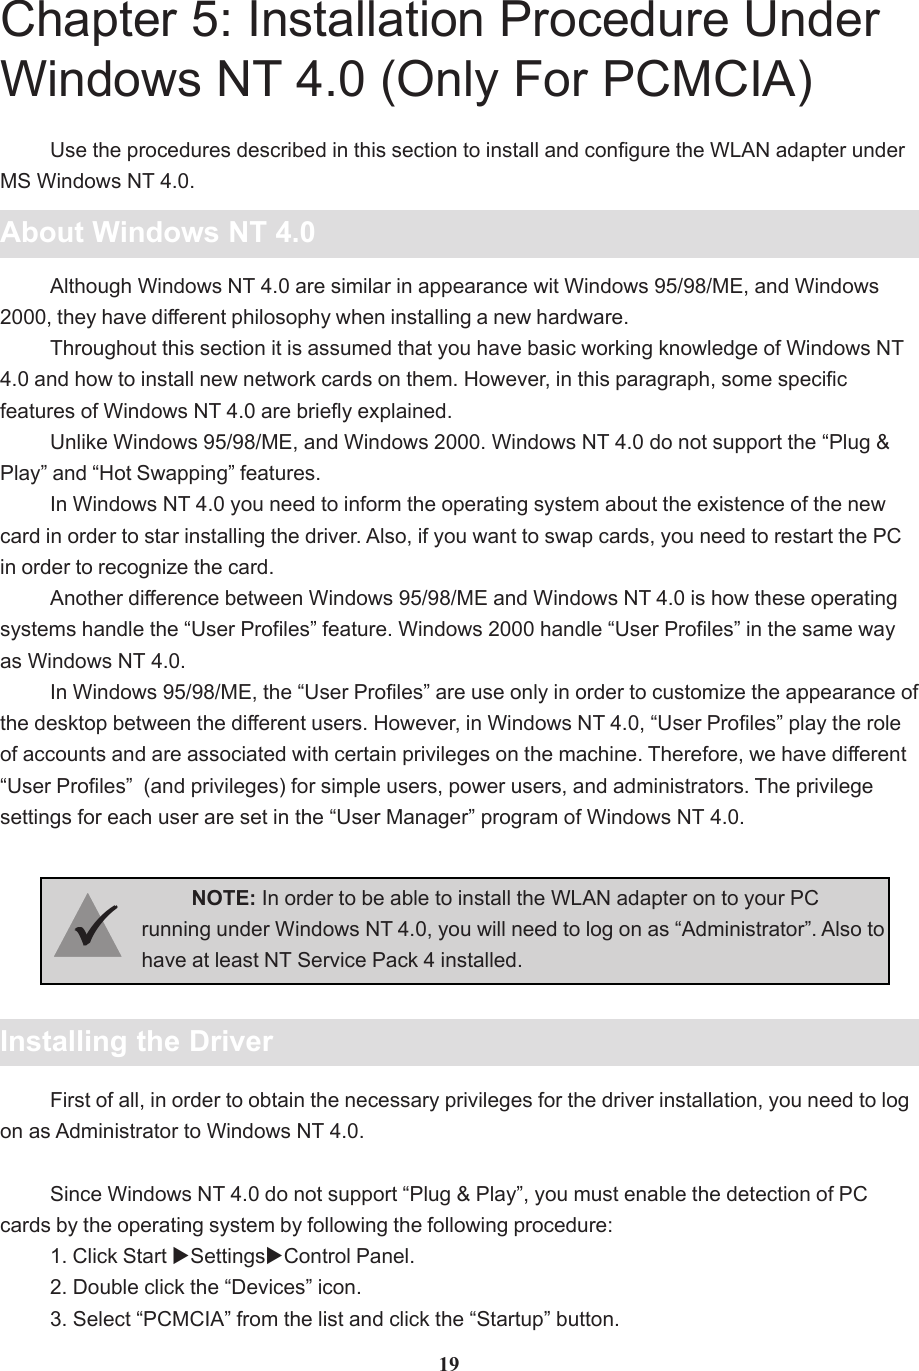 Chapter 5: Installation Procedure UnderWindows NT 4.0 (Only For PCMCIA)About Windows NT 4.0Use the procedures described in this section to install and configure the WLAN adapter underMS Windows NT 4.0.Although Windows NT 4.0 are similar in appearance wit Windows 95/98/ME, and Windows2000, they have different philosophy when installing a new hardware.Throughout this section it is assumed that you have basic working knowledge of Windows NT4.0 and how to install new network cards on them. However, in this paragraph, some specificfeatures of Windows NT 4.0 are briefly explained.Unlike Windows 95/98/ME, and Windows 2000. Windows NT 4.0 do not support the “Plug &amp;Play” and “Hot Swapping” features.In Windows NT 4.0 you need to inform the operating system about the existence of the newcard in order to star installing the driver. Also, if you want to swap cards, you need to restart the PCin order to recognize the card.Another difference between Windows 95/98/ME and Windows NT 4.0 is how these operatingsystems handle the “User Profiles” feature. Windows 2000 handle “User Profiles” in the same wayas Windows NT 4.0.In Windows 95/98/ME, the “User Profiles” are use only in order to customize the appearance ofthe desktop between the different users. However, in Windows NT 4.0, “User Profiles” play the roleof accounts and are associated with certain privileges on the machine. Therefore, we have different“User Profiles”  (and privileges) for simple users, power users, and administrators. The privilegesettings for each user are set in the “User Manager” program of Windows NT 4.0.Installing the DriverNOTE: In order to be able to install the WLAN adapter on to your PCrunning under Windows NT 4.0, you will need to log on as “Administrator”. Also tohave at least NT Service Pack 4 installed.33333First of all, in order to obtain the necessary privileges for the driver installation, you need to logon as Administrator to Windows NT 4.0.Since Windows NT 4.0 do not support “Plug &amp; Play”, you must enable the detection of PCcards by the operating system by following the following procedure:1. Click Start XSettingsXControl Panel.2. Double click the “Devices” icon.3. Select “PCMCIA” from the list and click the “Startup” button.19